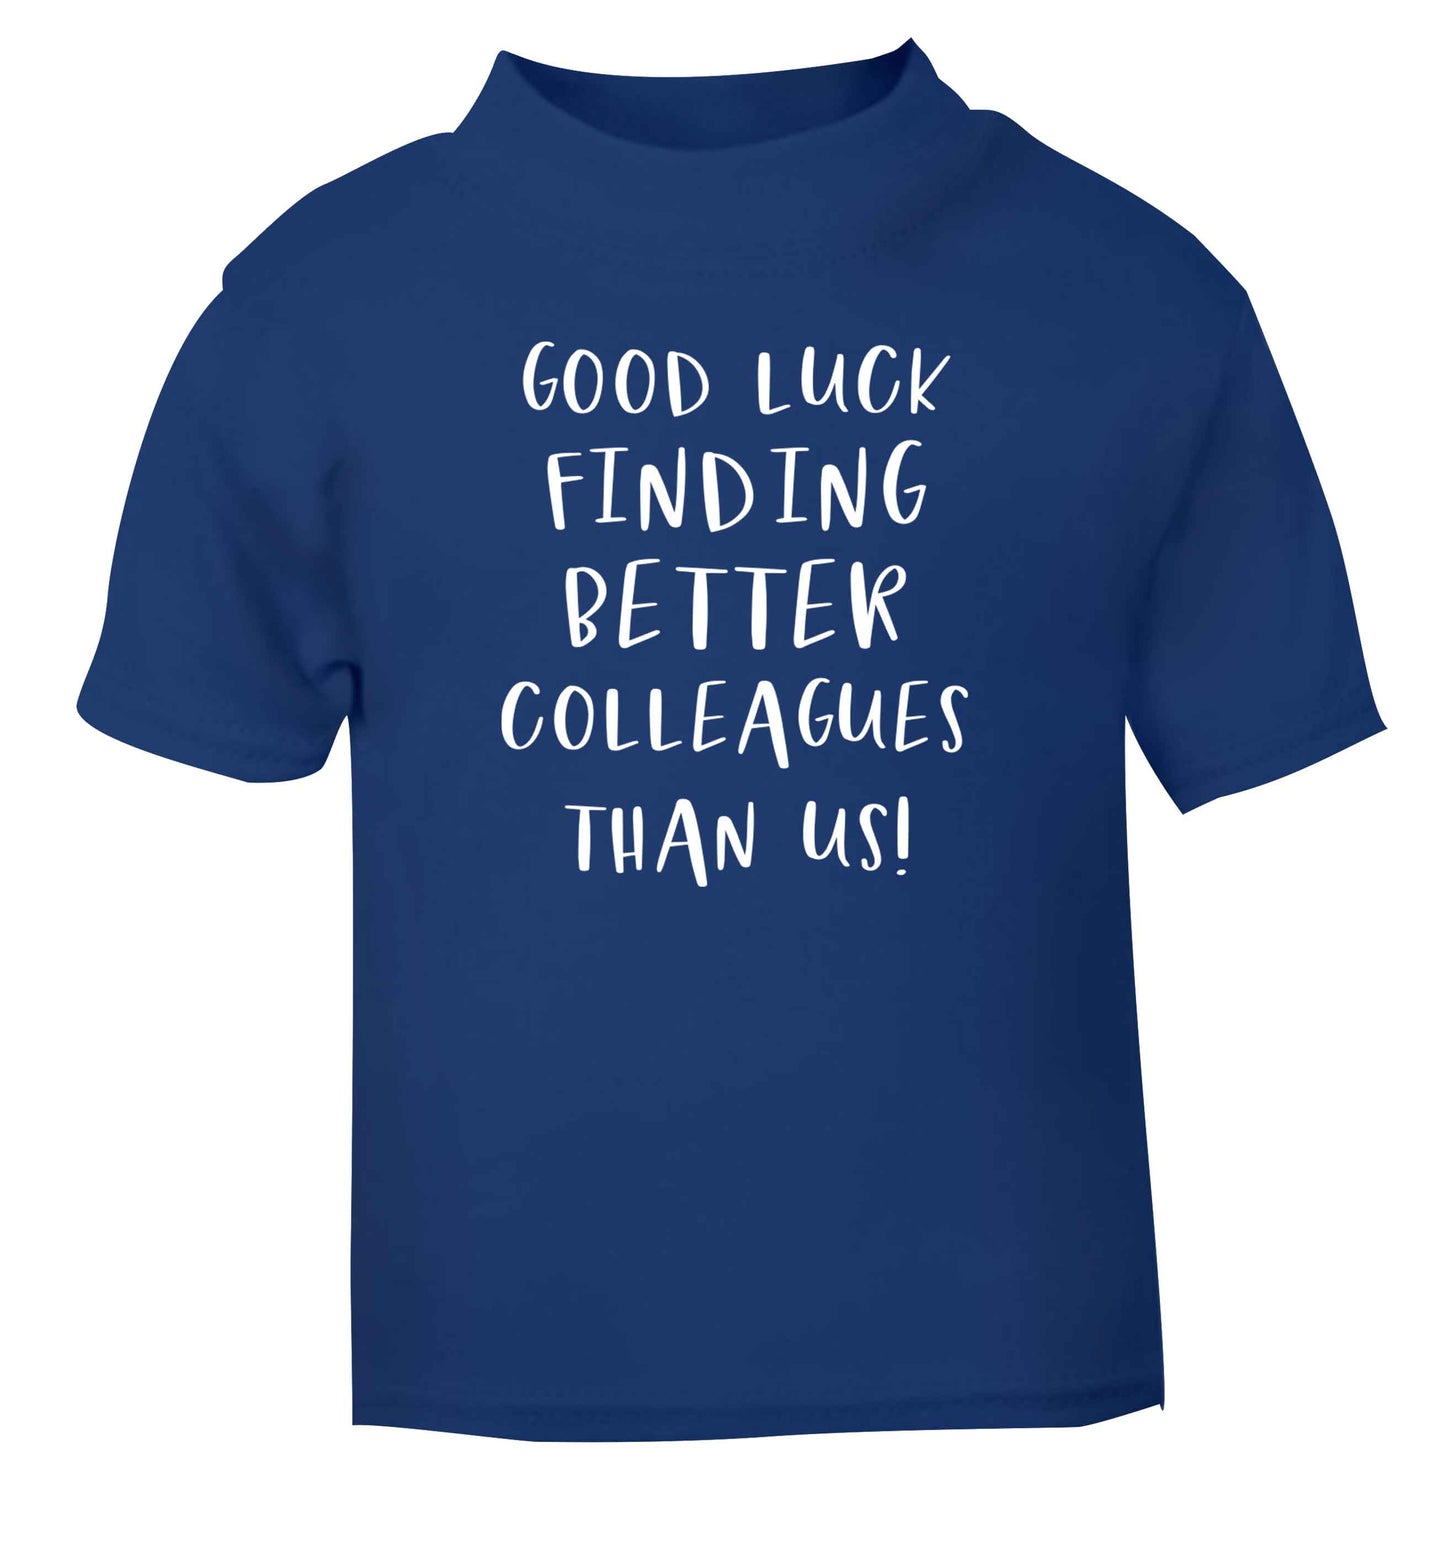 Good luck finding better colleagues than us! blue Baby Toddler Tshirt 2 Years